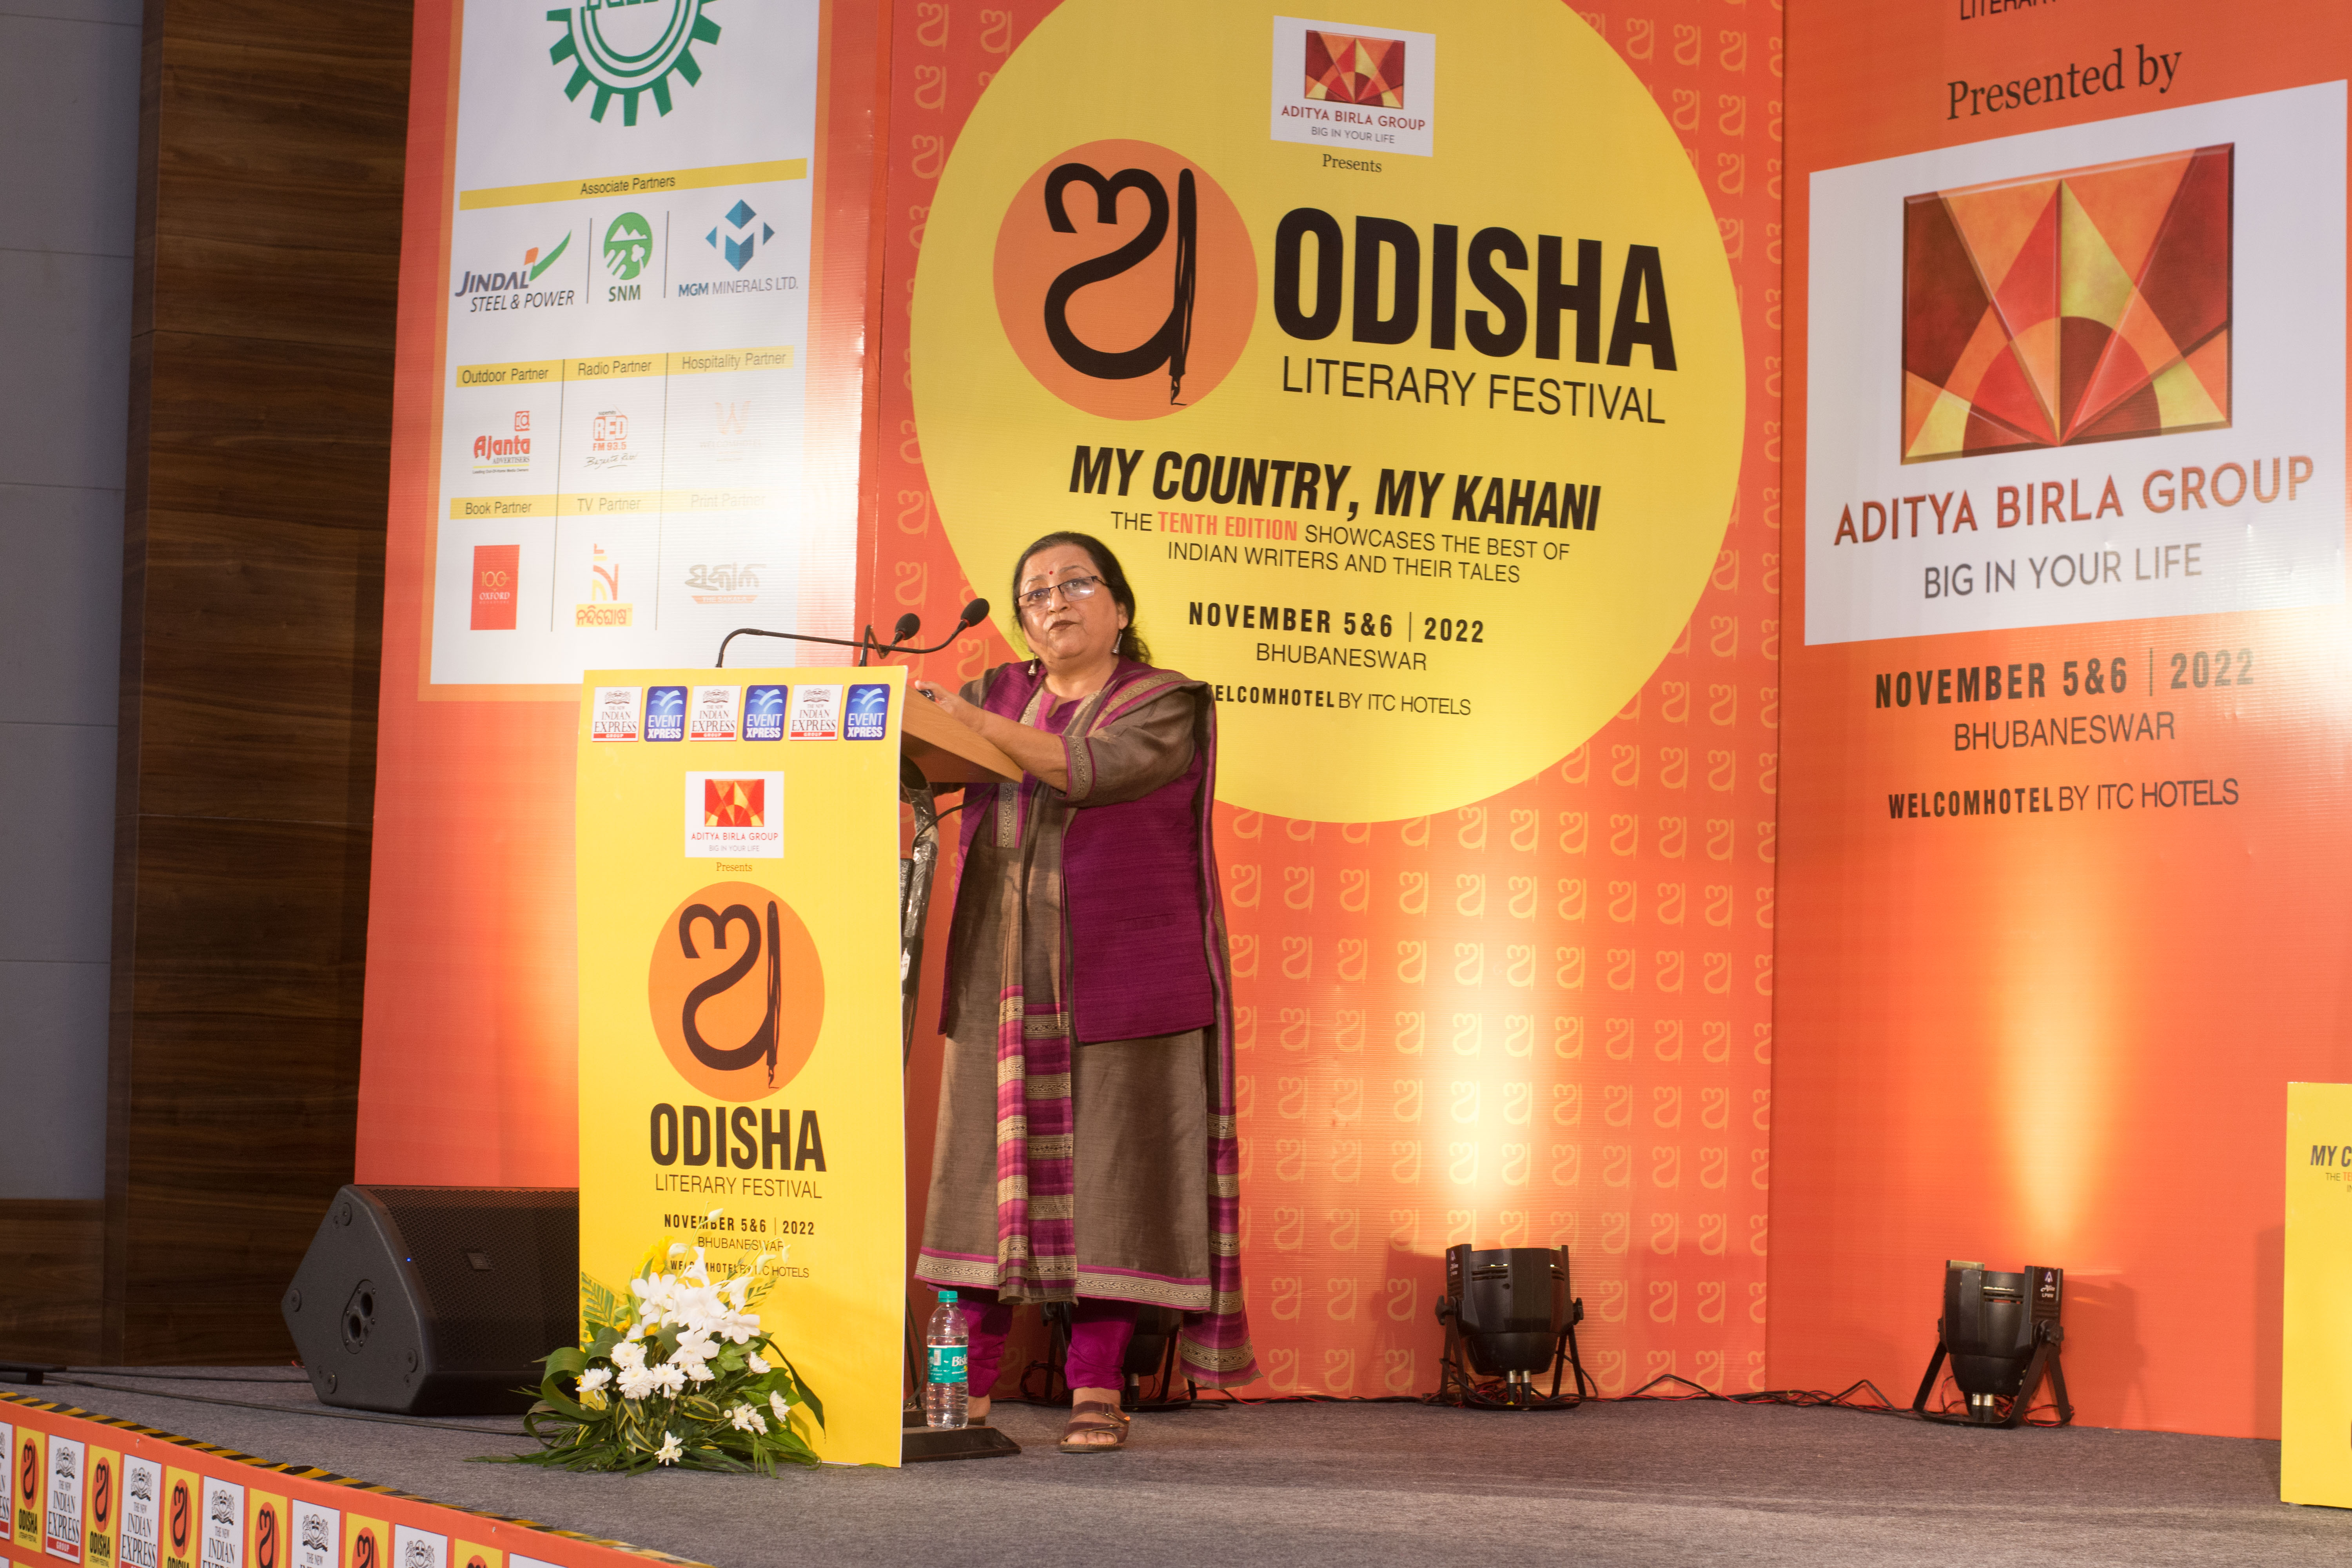 Madhu Kishwar, Academic and researcher speaking in fourth session - The Hijab Question: Who Decides Who Wears What, on the first day of Odisha Literay Festival in Bhubaneswar. Express / DEBADATTA MALLICK